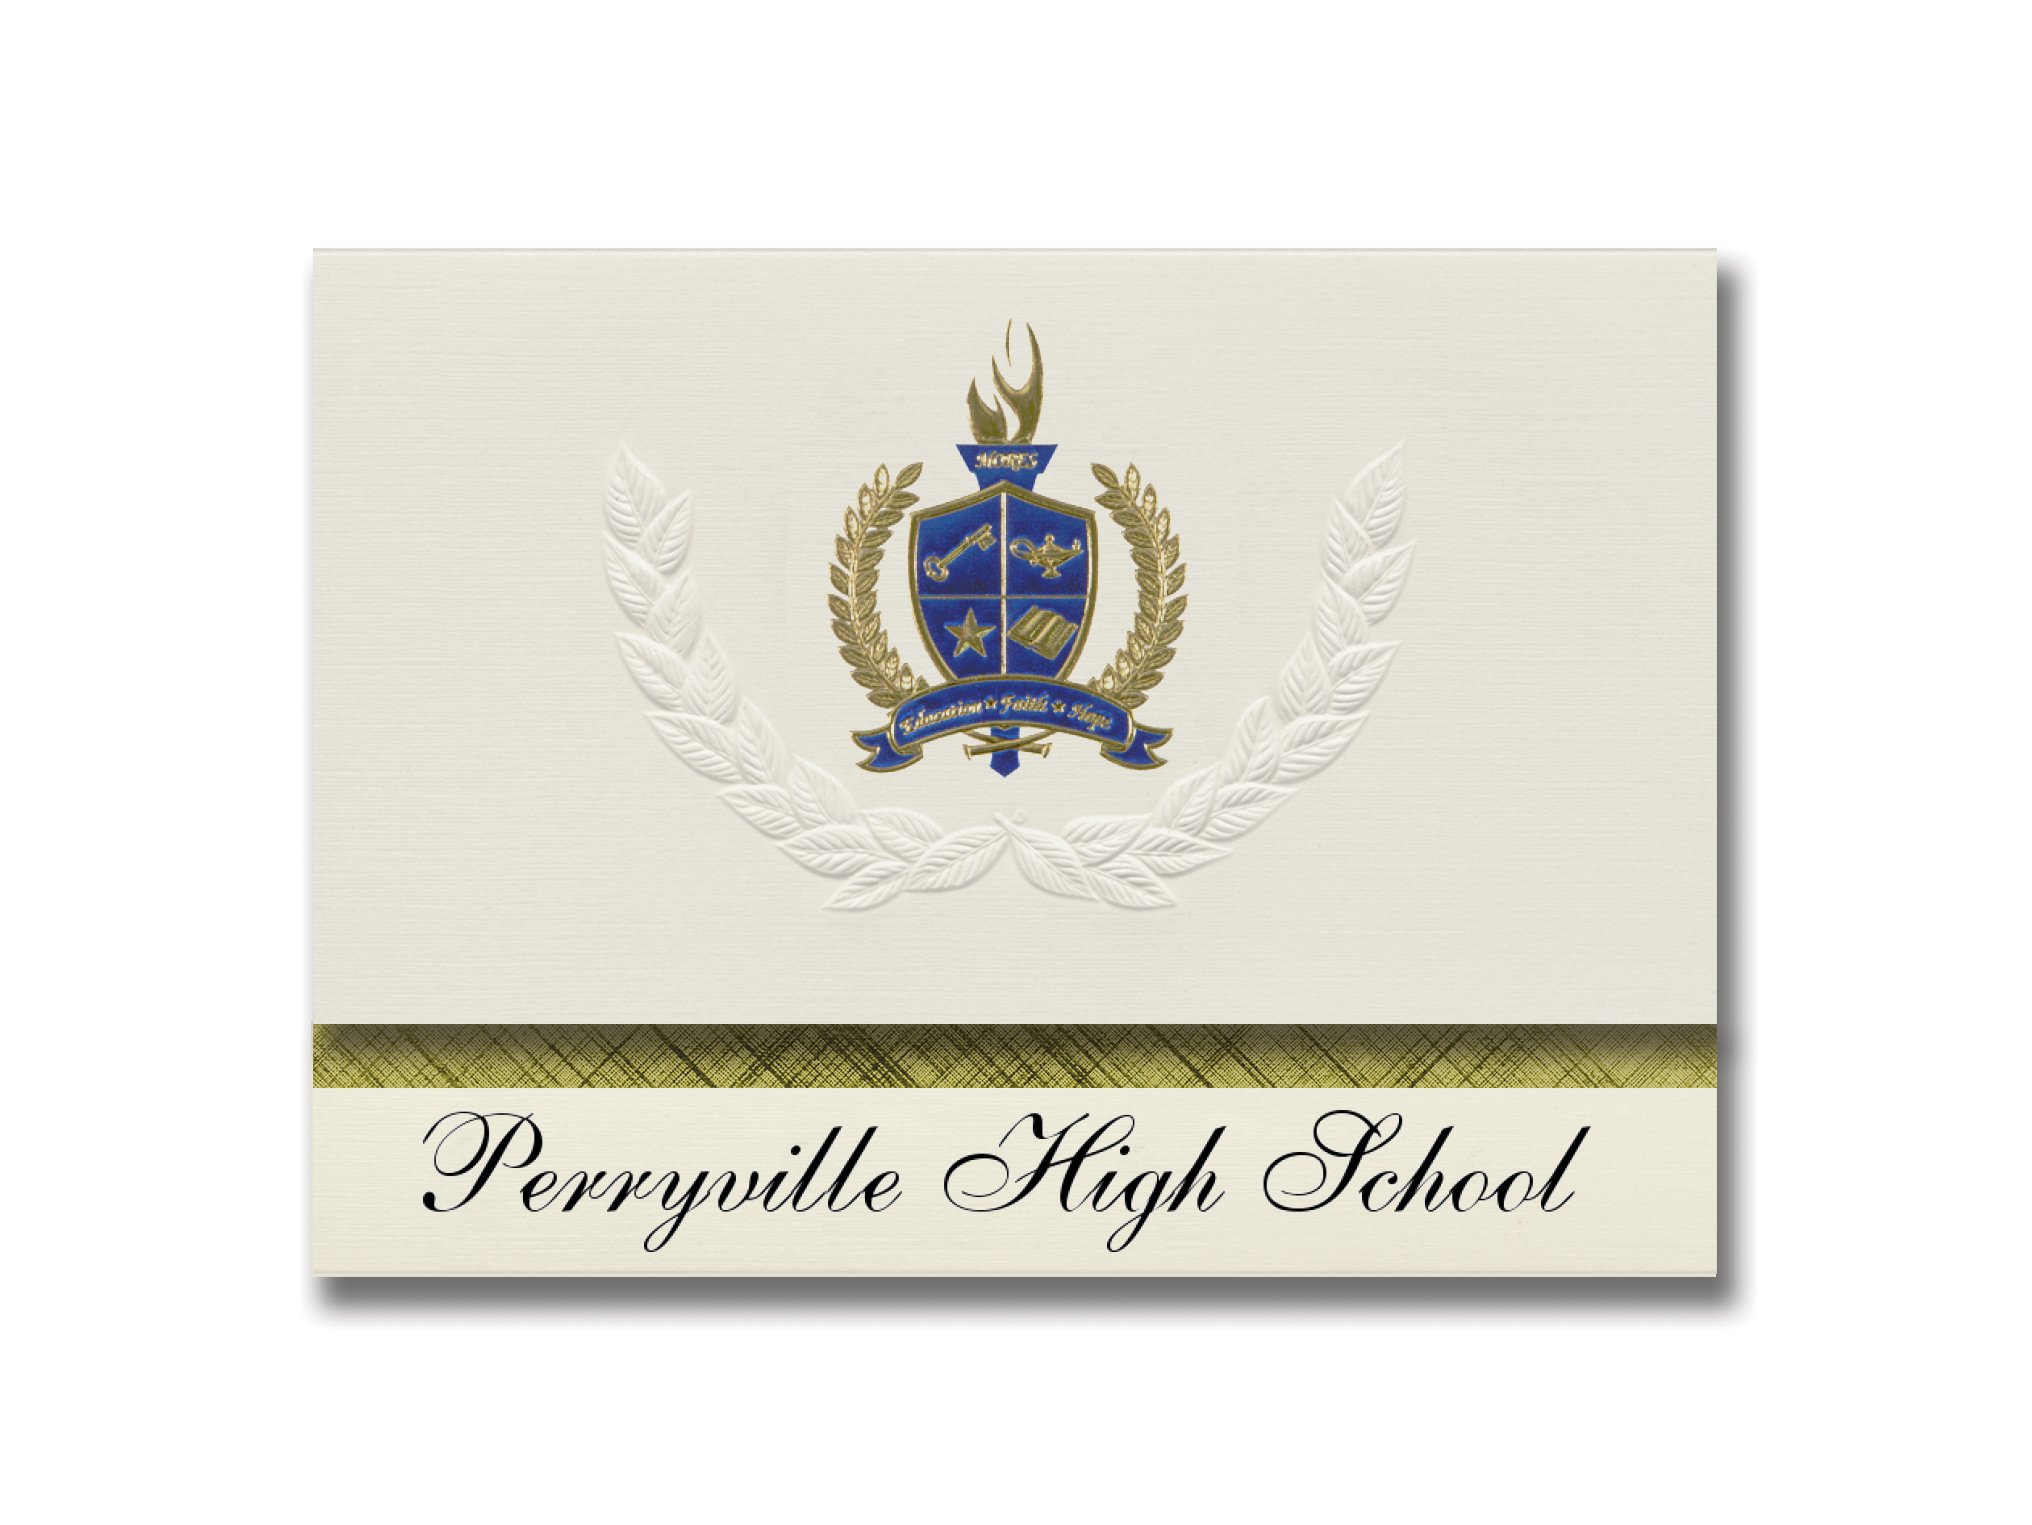 Signature Announcements Perryville High School (Perryville, AR) Graduation Announcements, Presidential style, Elite package of 25 with Gold & Blue ...